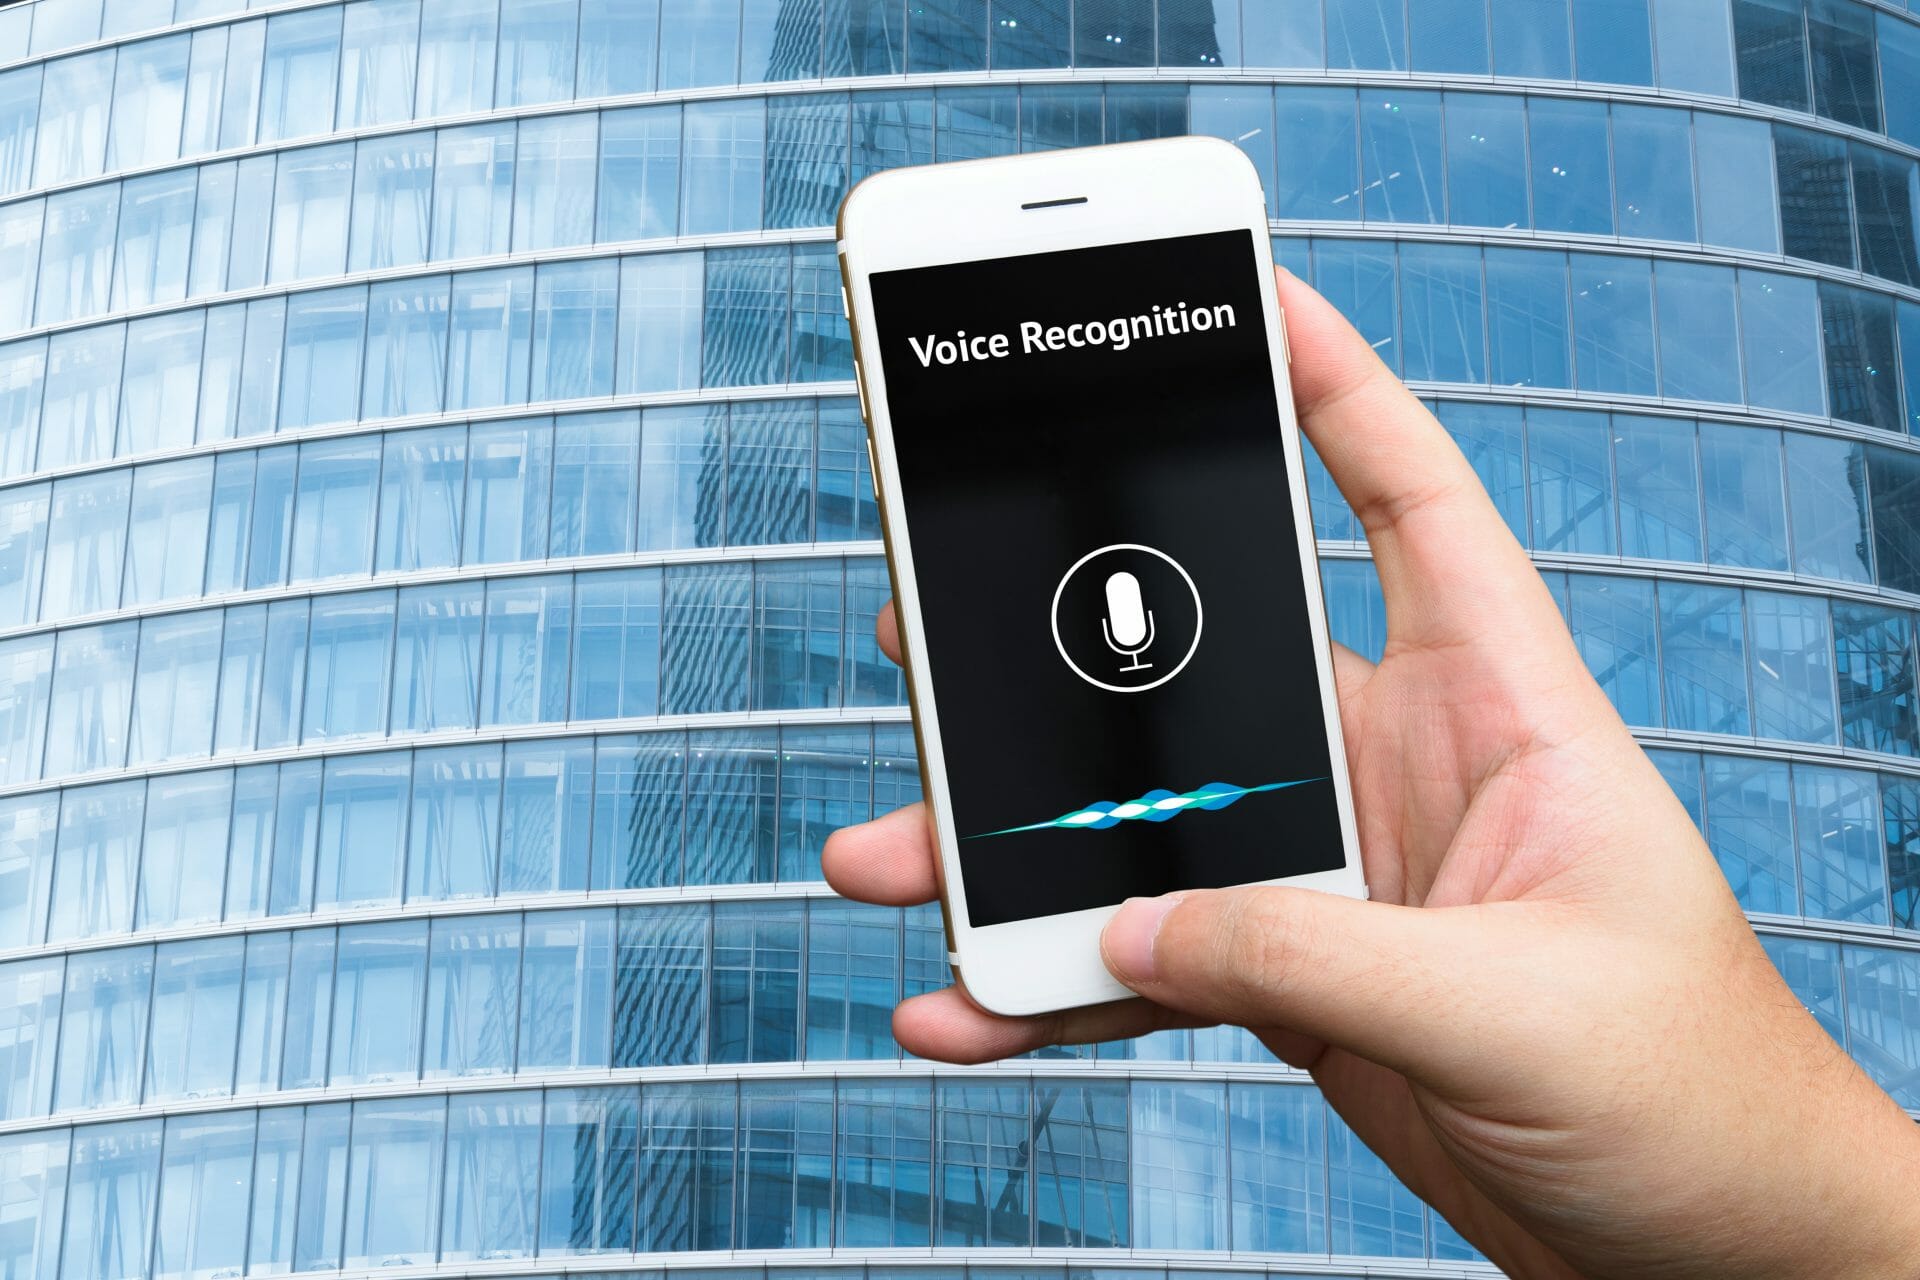 How Does Voice Recognition Work